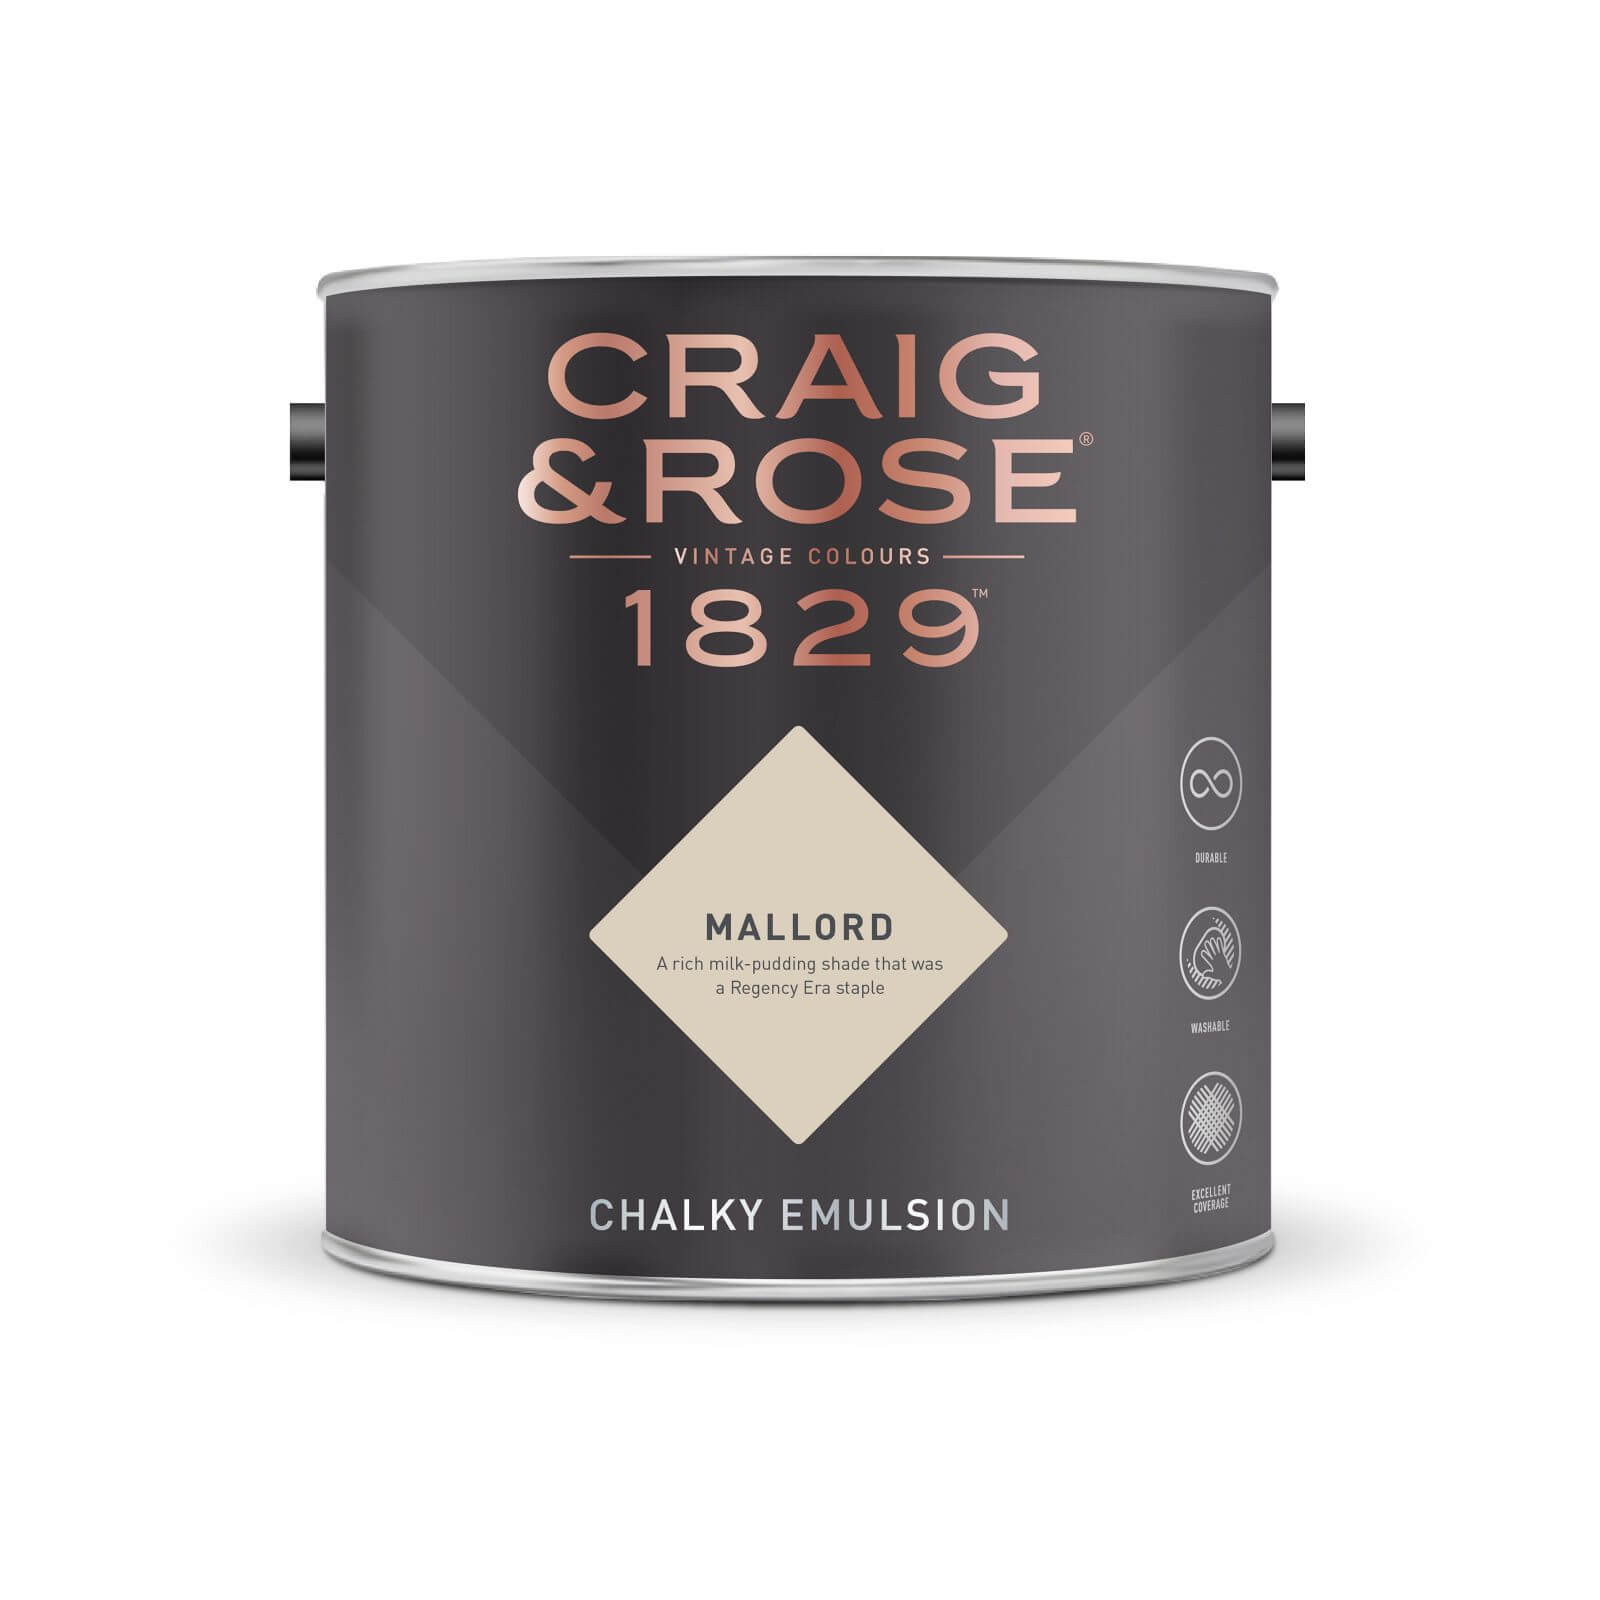 Craig & Rose 1829 Chalky Emulsion Paint Mallord - Tester 50ml